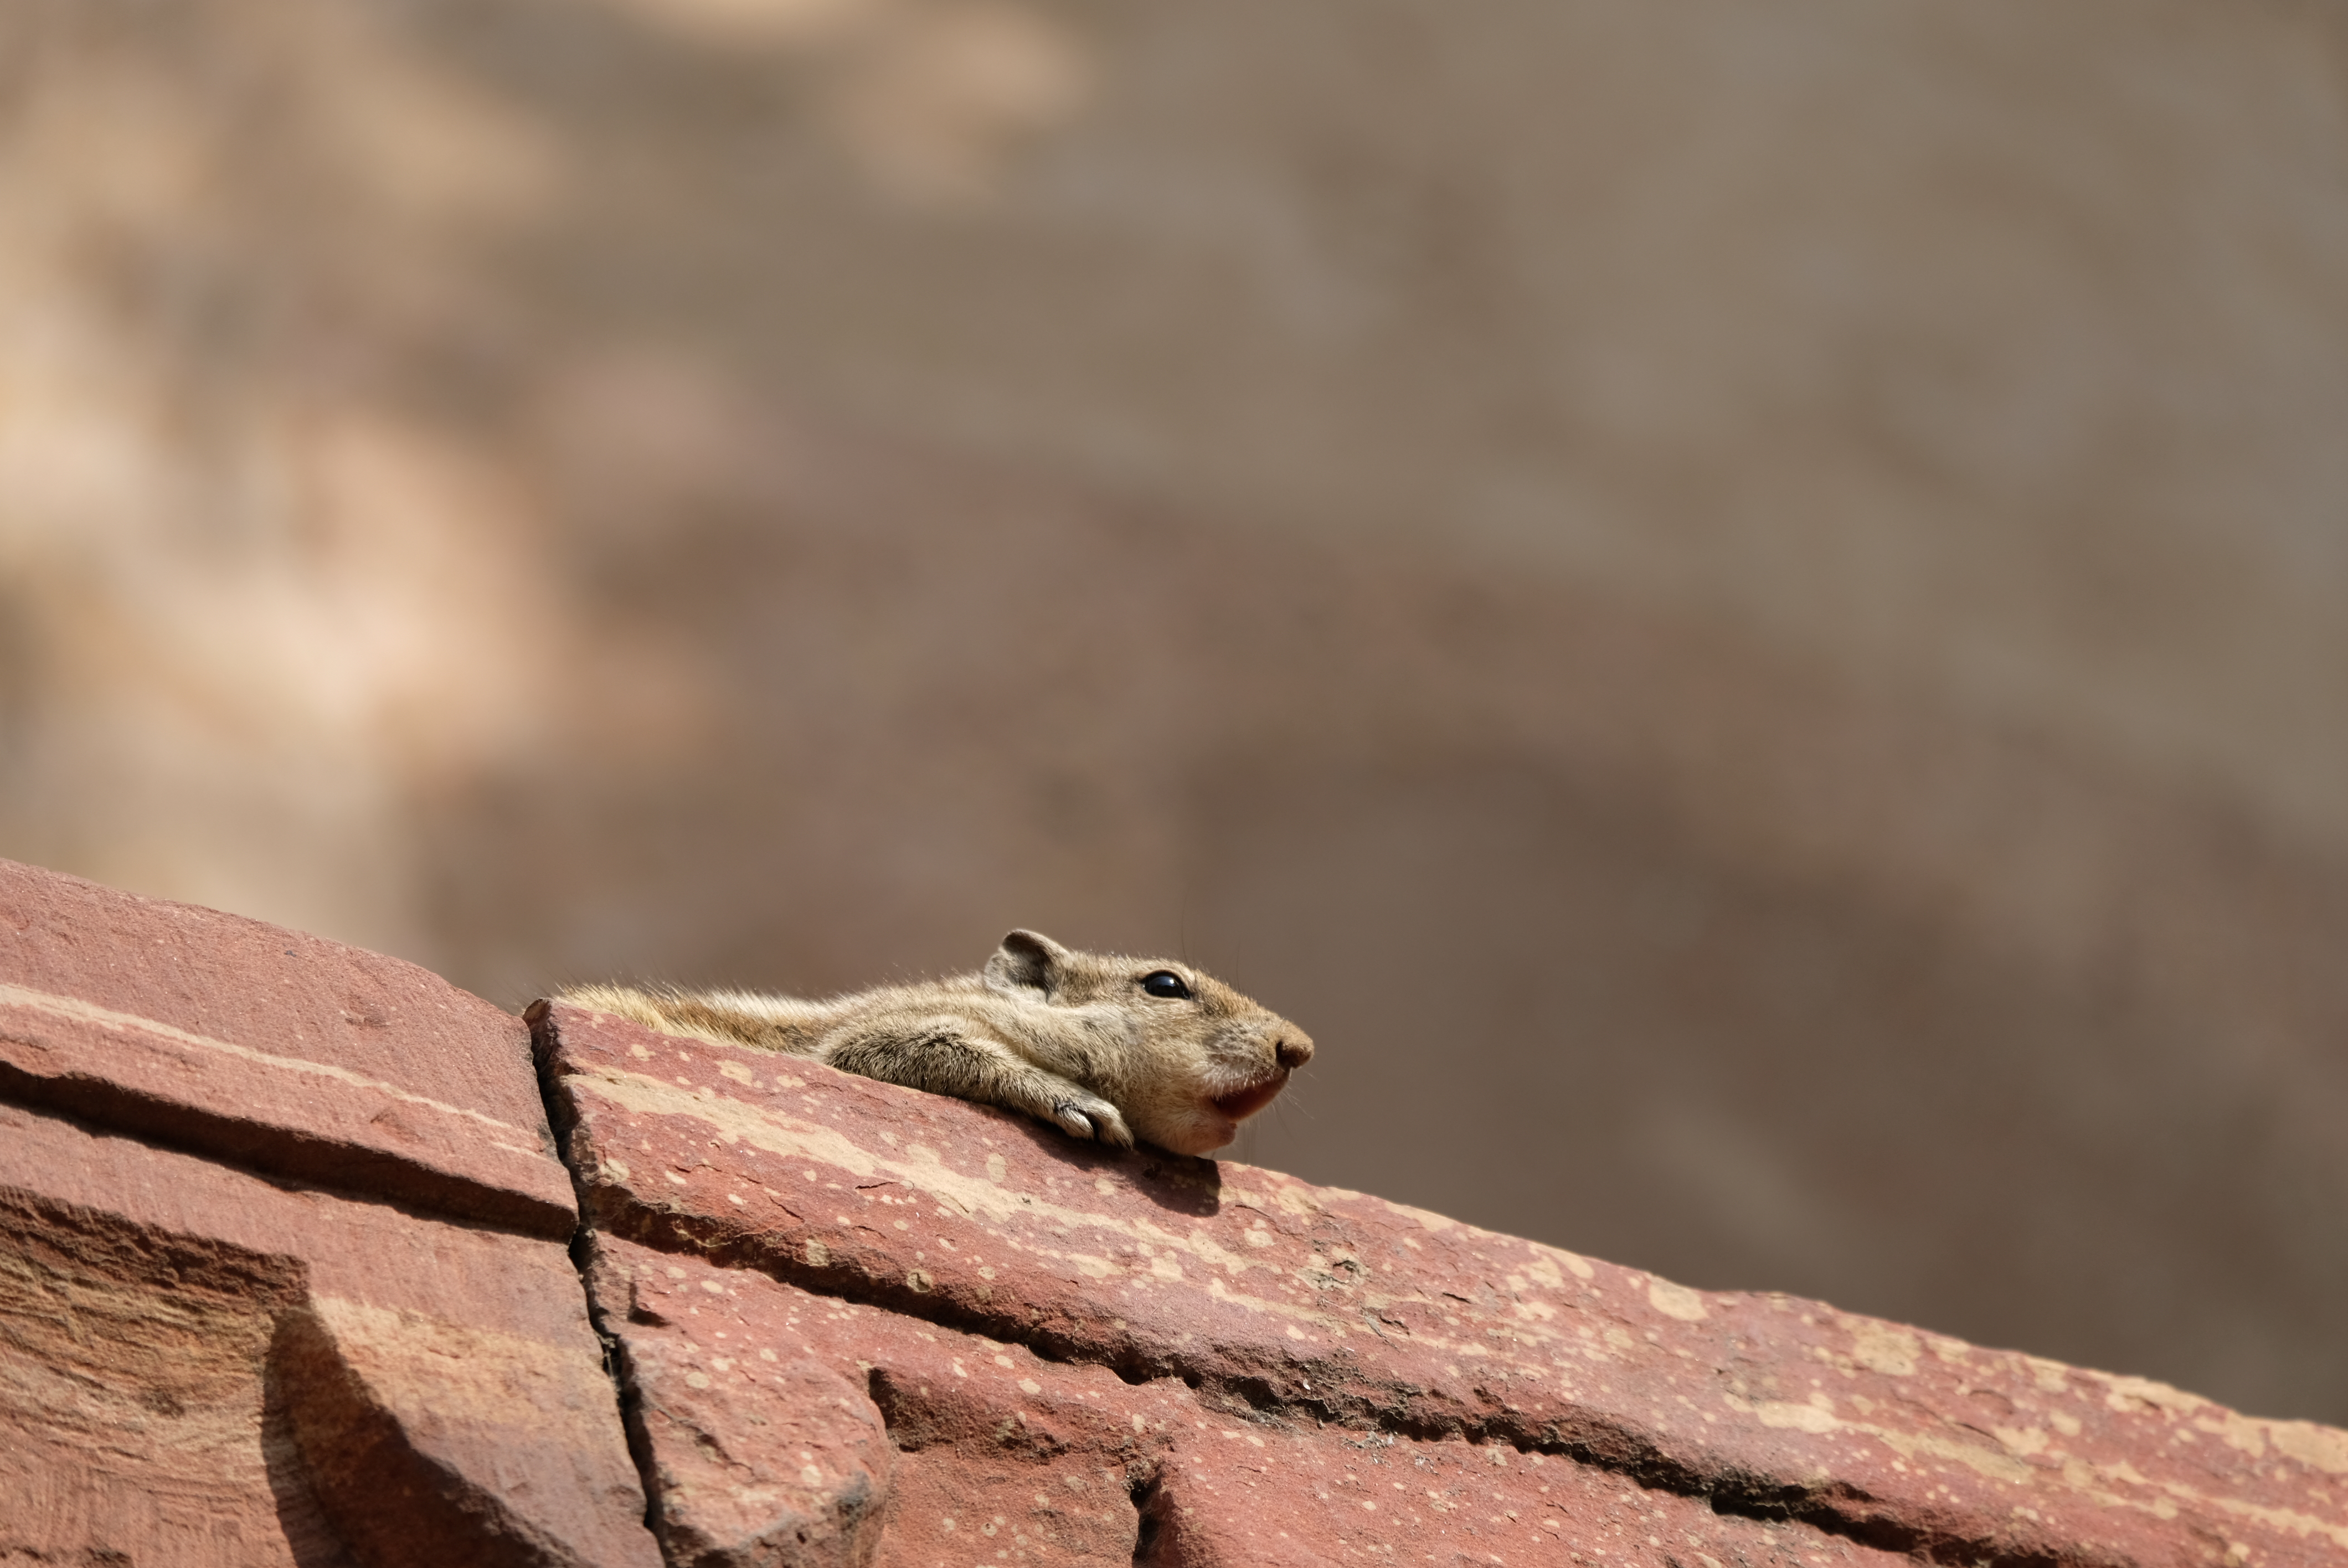 Squirrel on an Edge of a Rock Photo | Download free images from Mystock